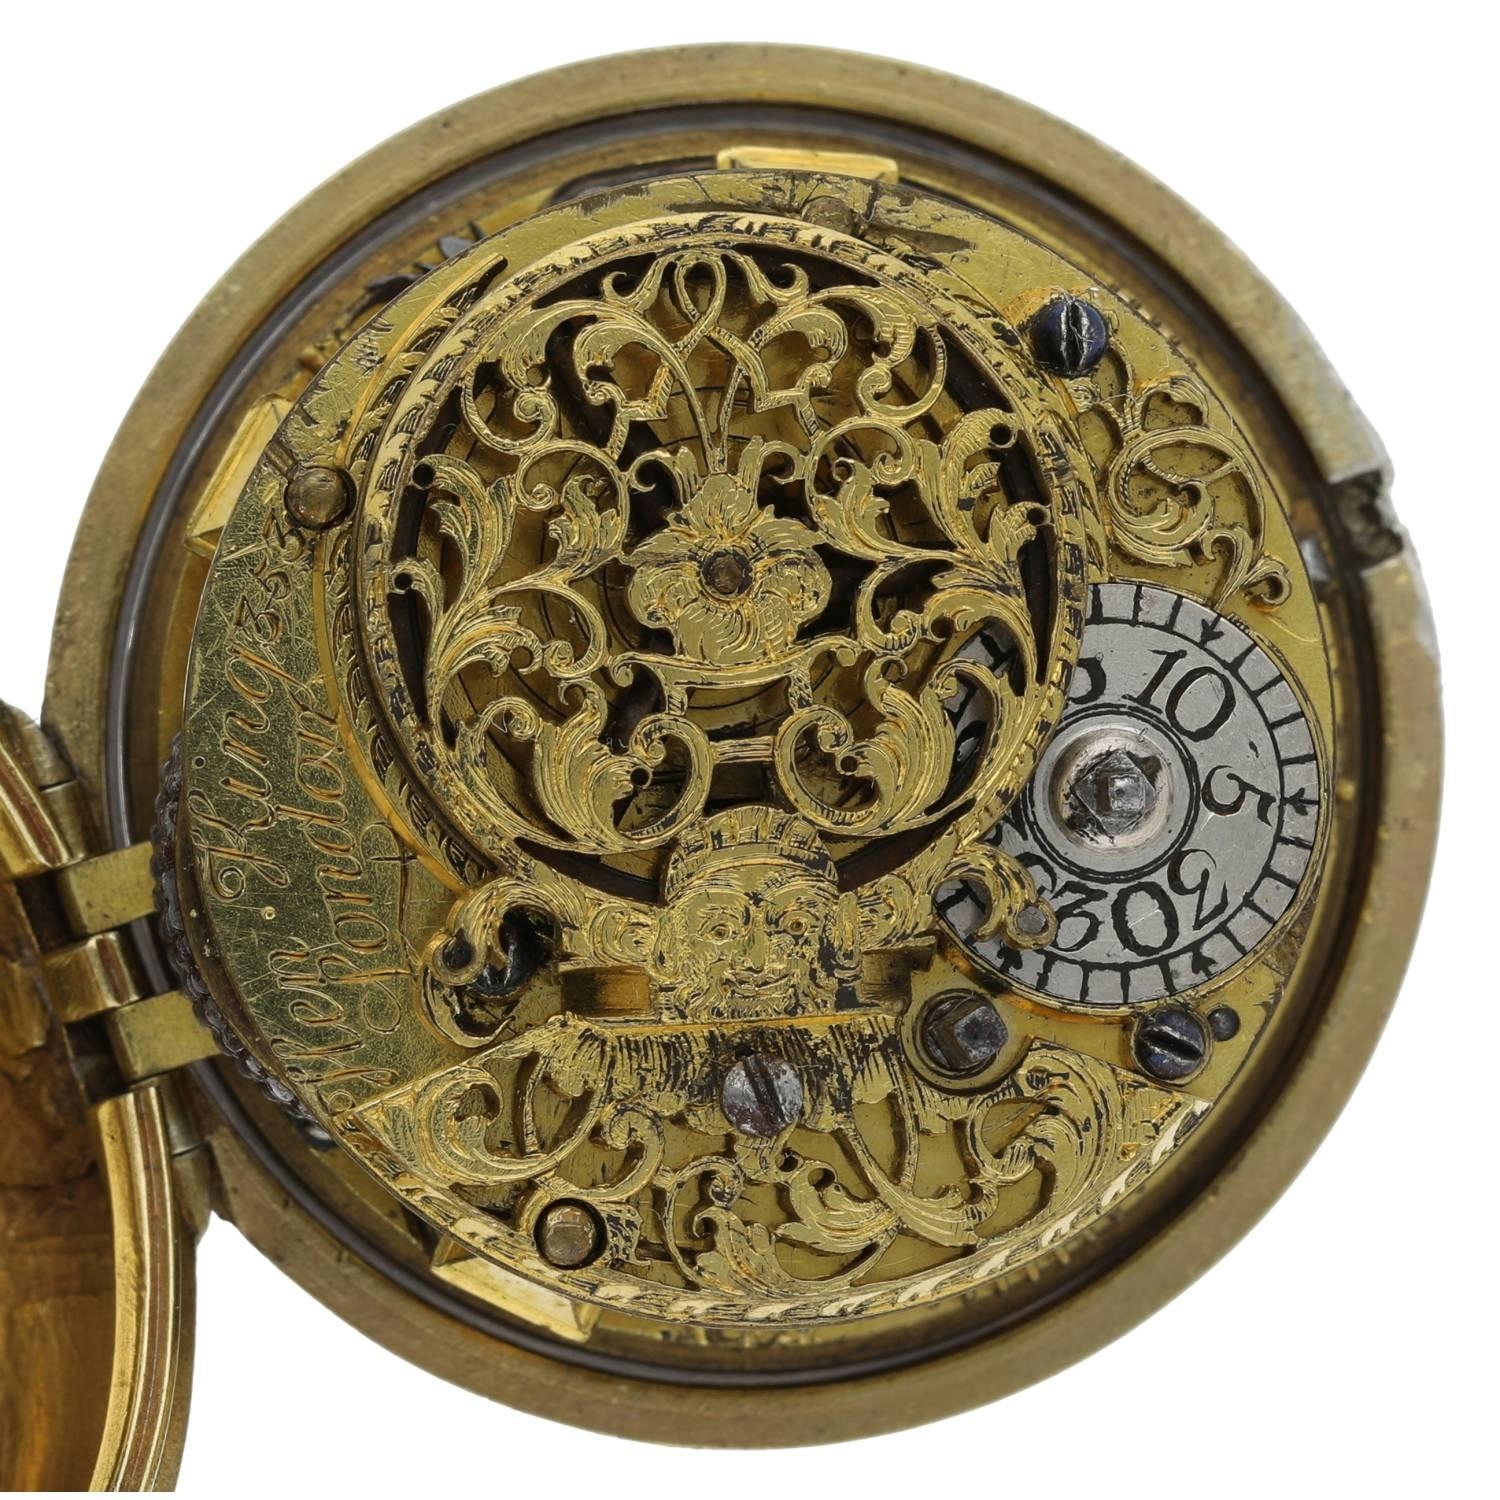 Henry King, London - 18th century English gilt pair cased verge pocket watch, signed fusee movement, - Image 4 of 10